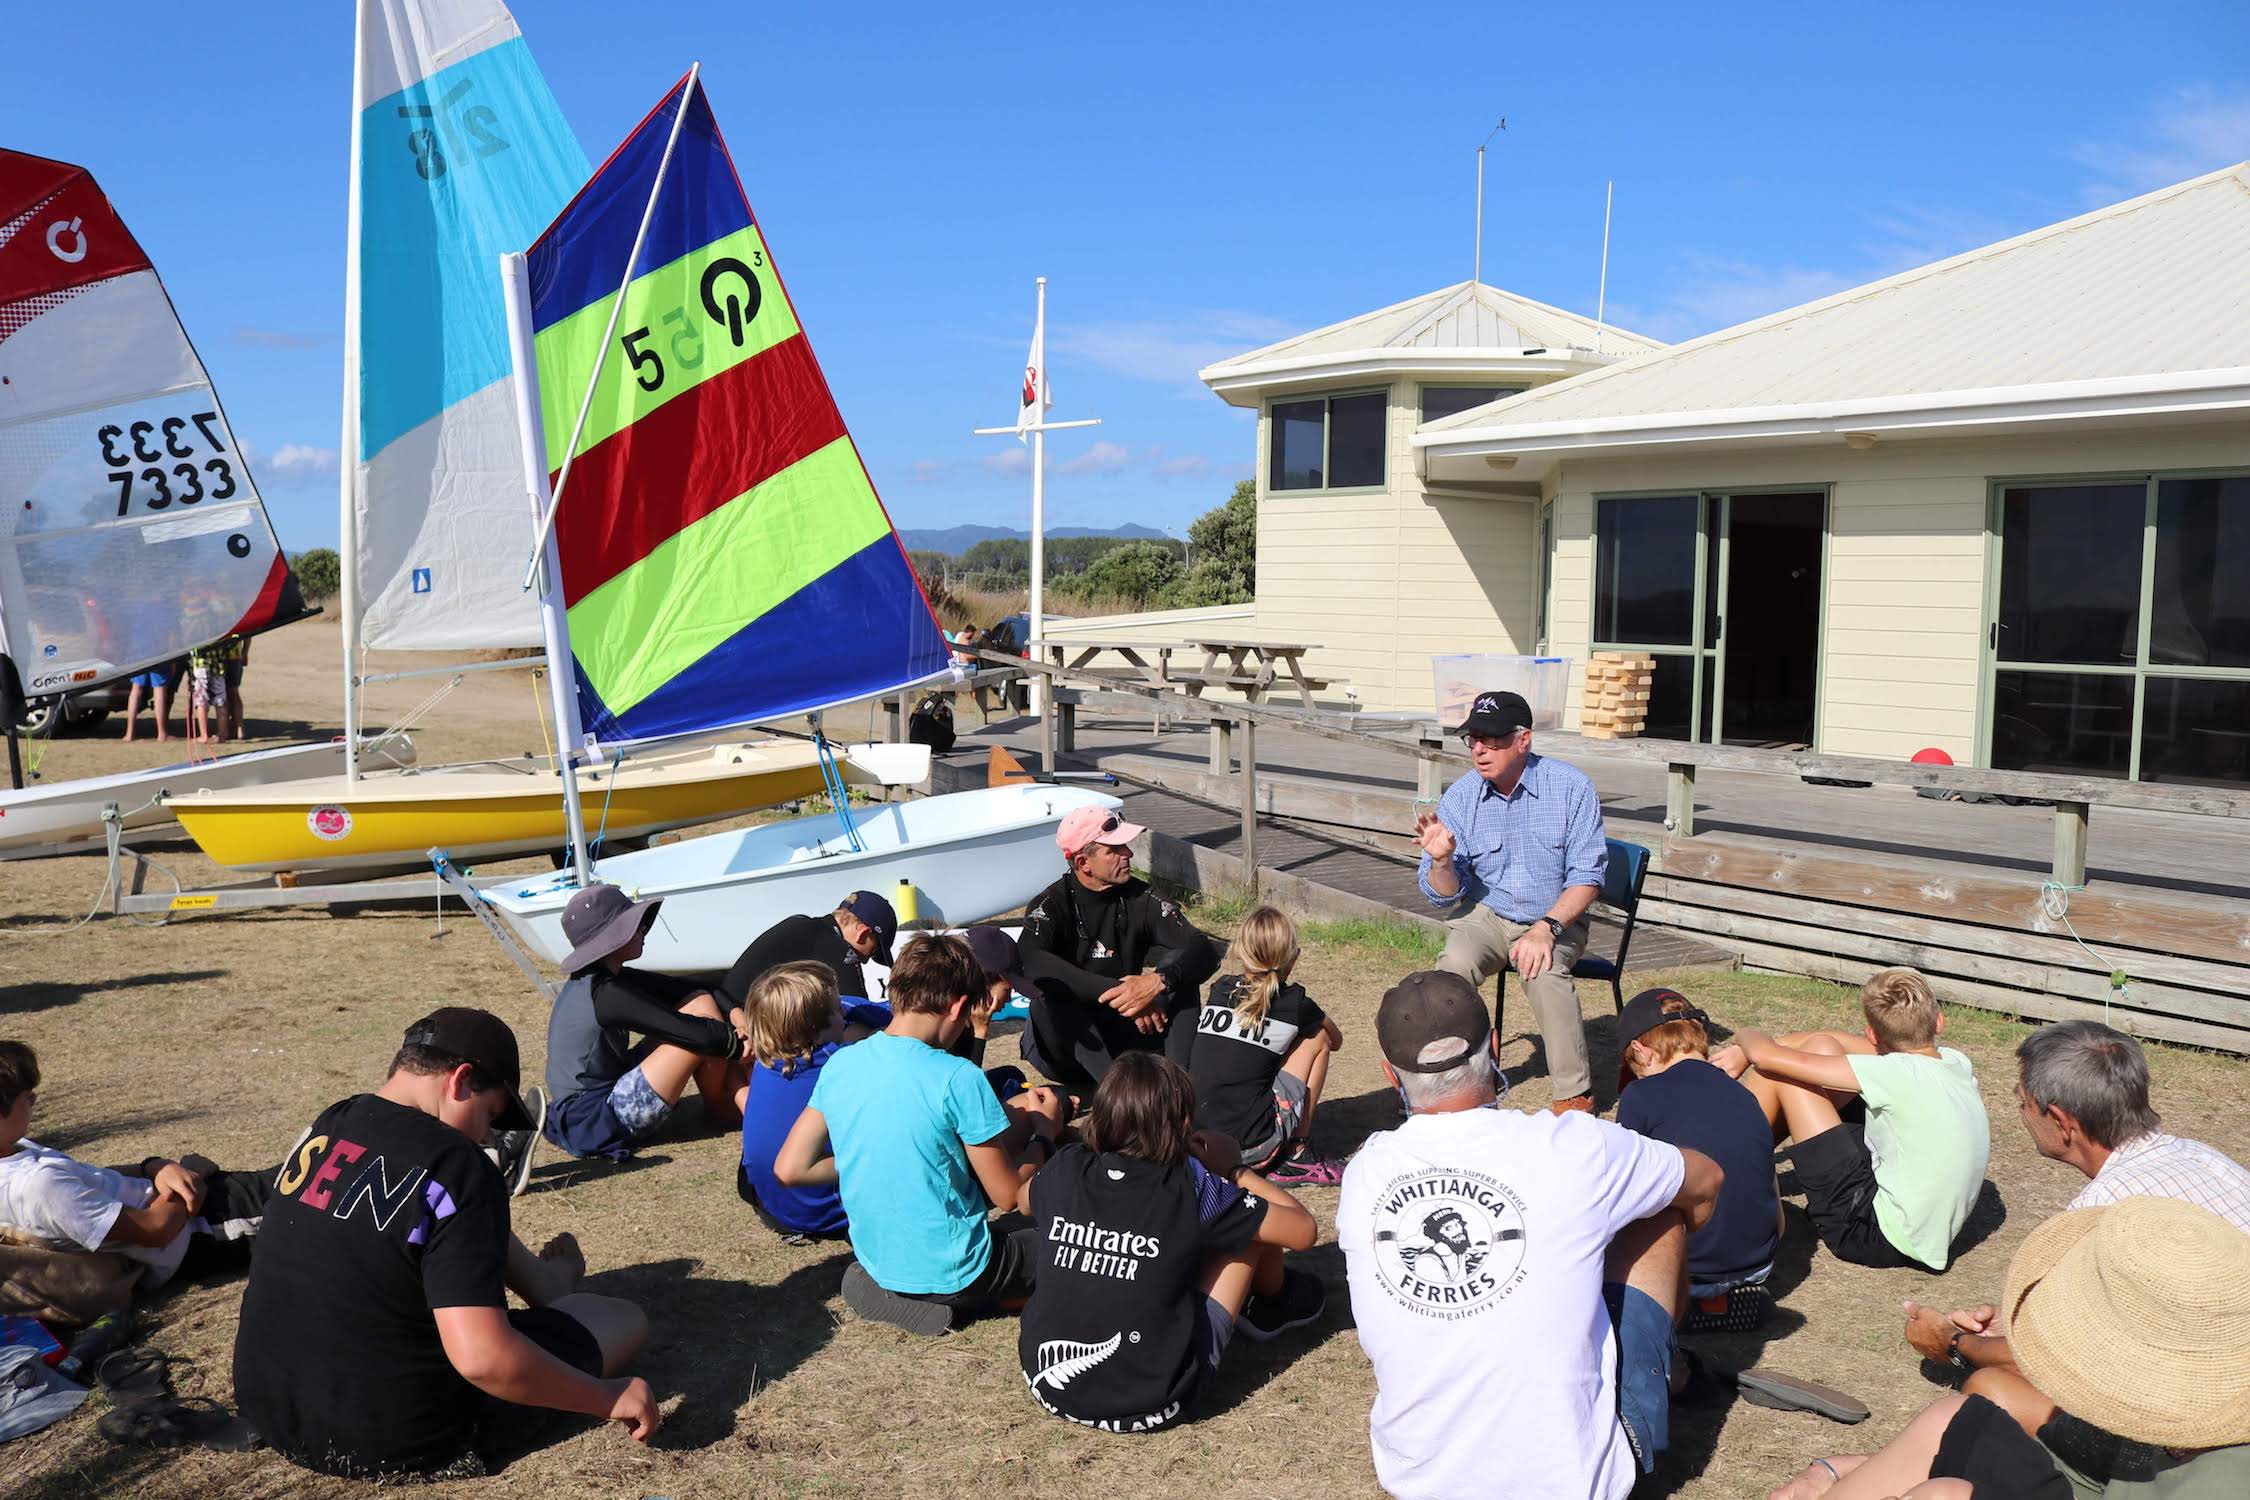 Ron Holland at Mercury Bay Boating Club 2019 giving a shore side lecture to Youth Sailing members before the world went into lock down due to Covid 19